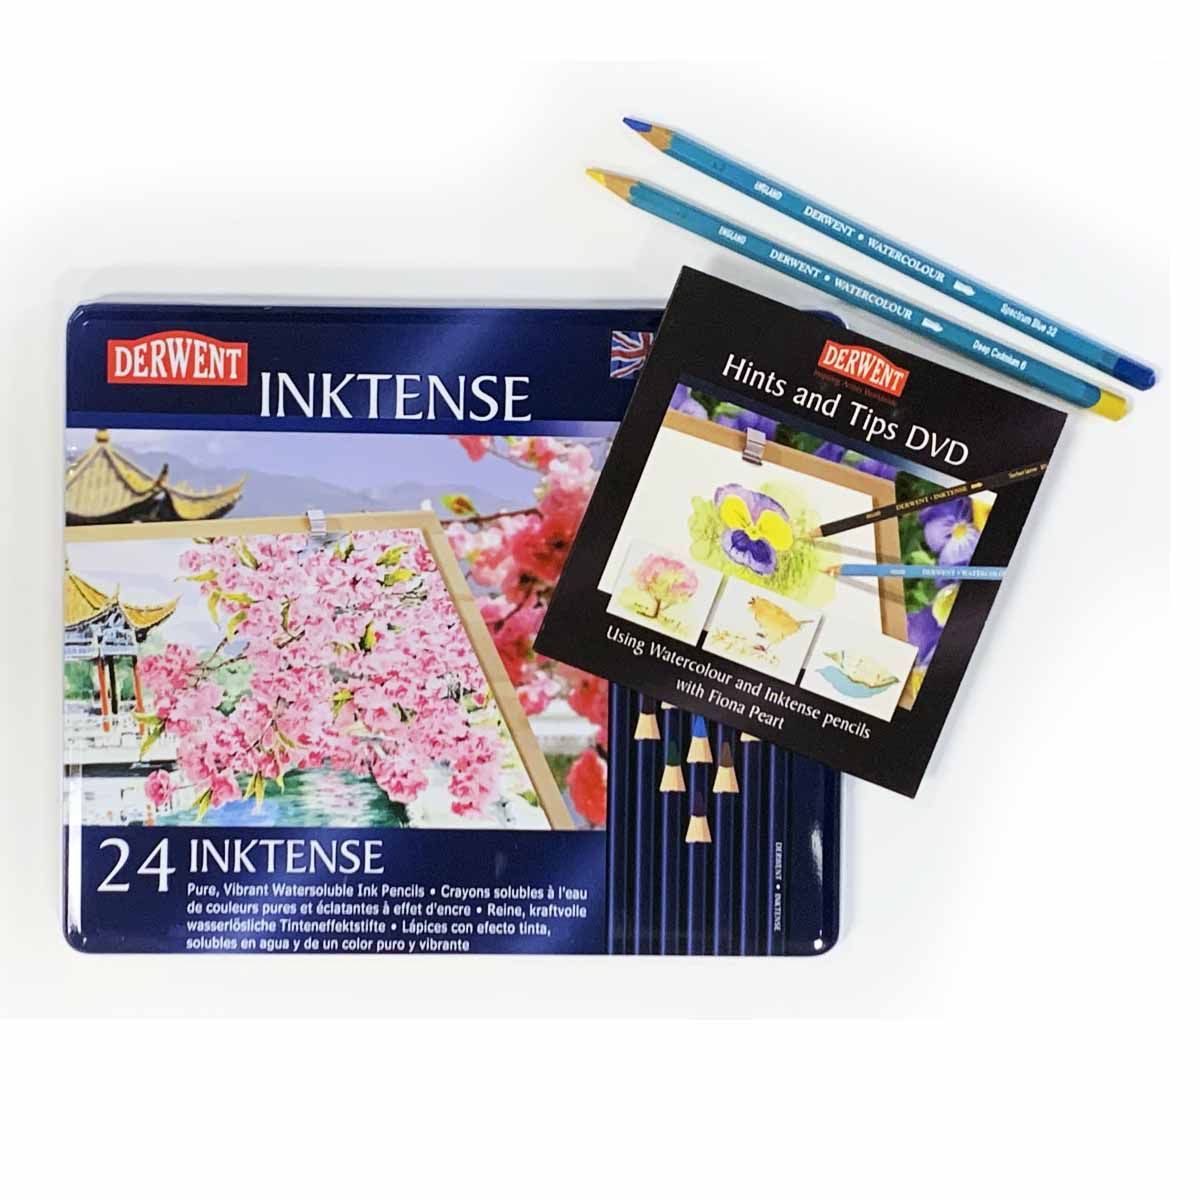 Inktense Tin Set of 24 with DVD + 2 Watercolor Pencils